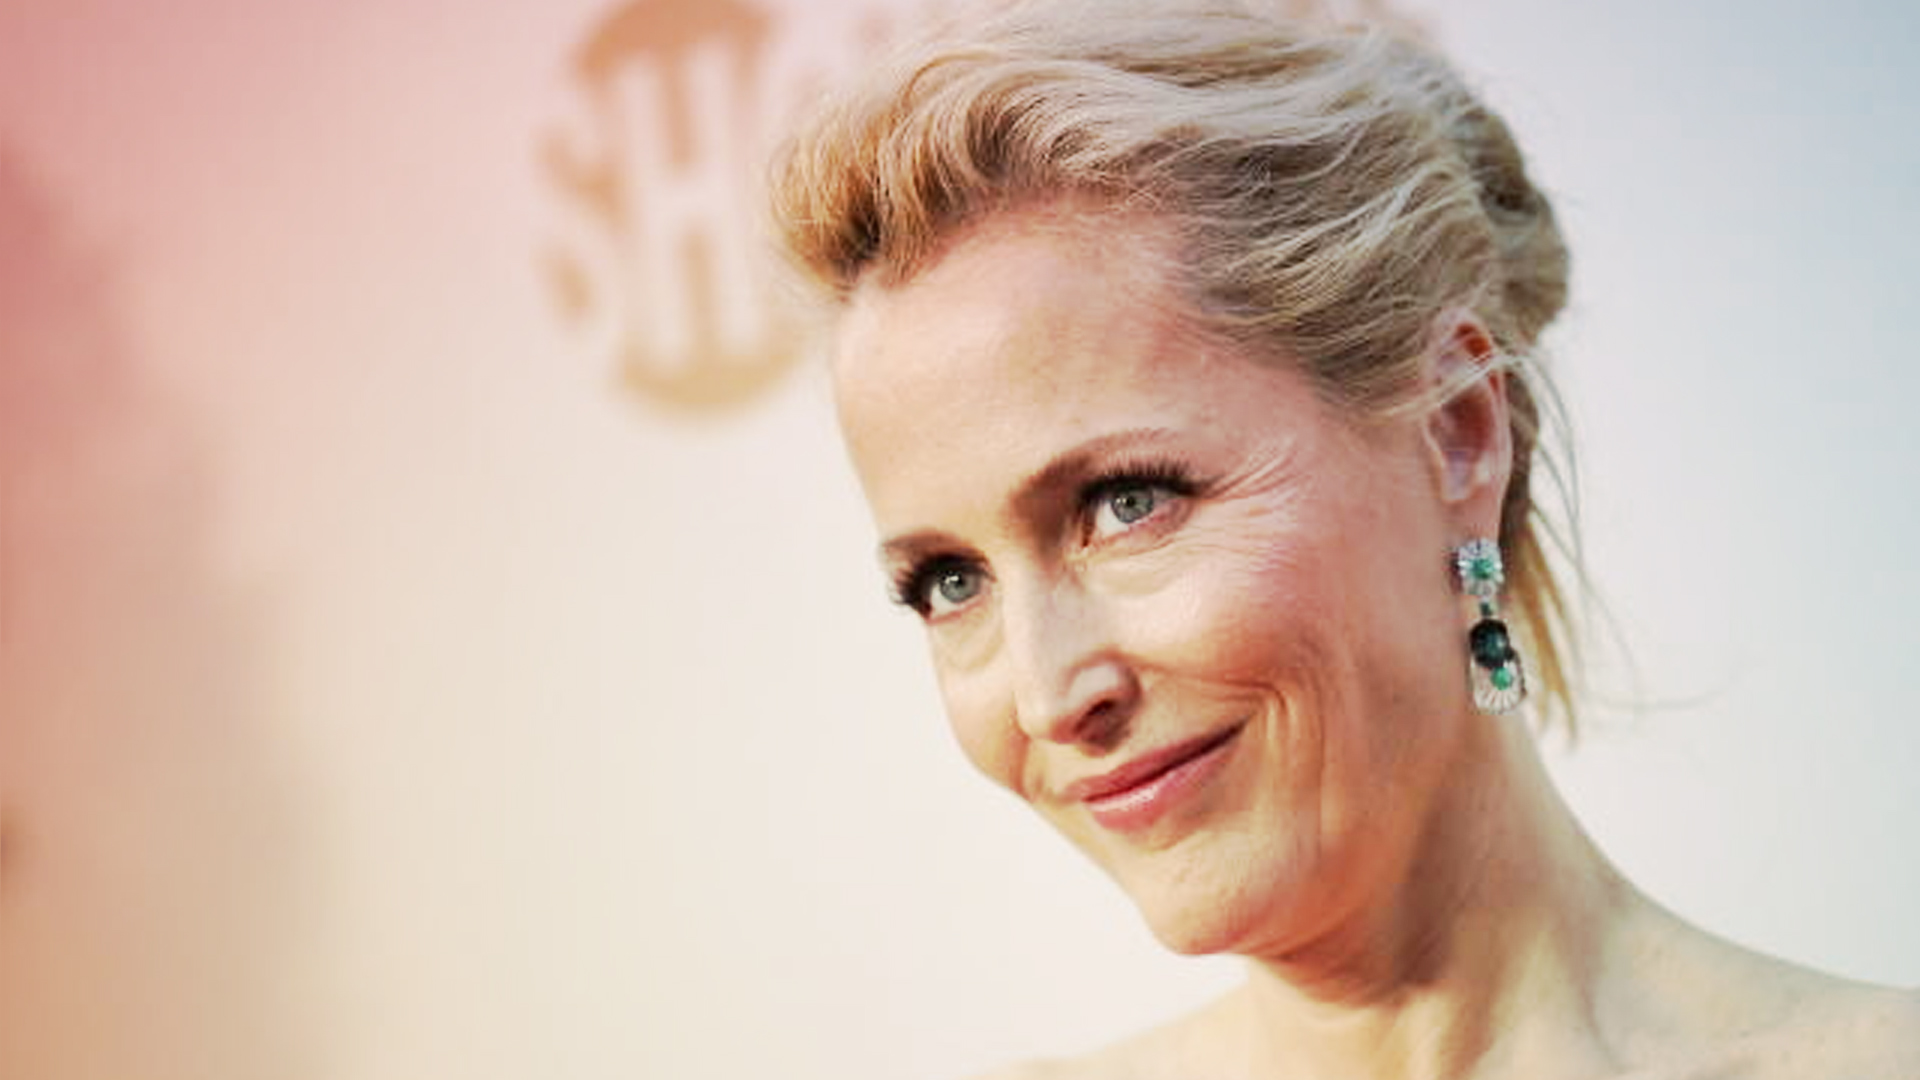 How Many Siblings Does Gillian Anderson Have?